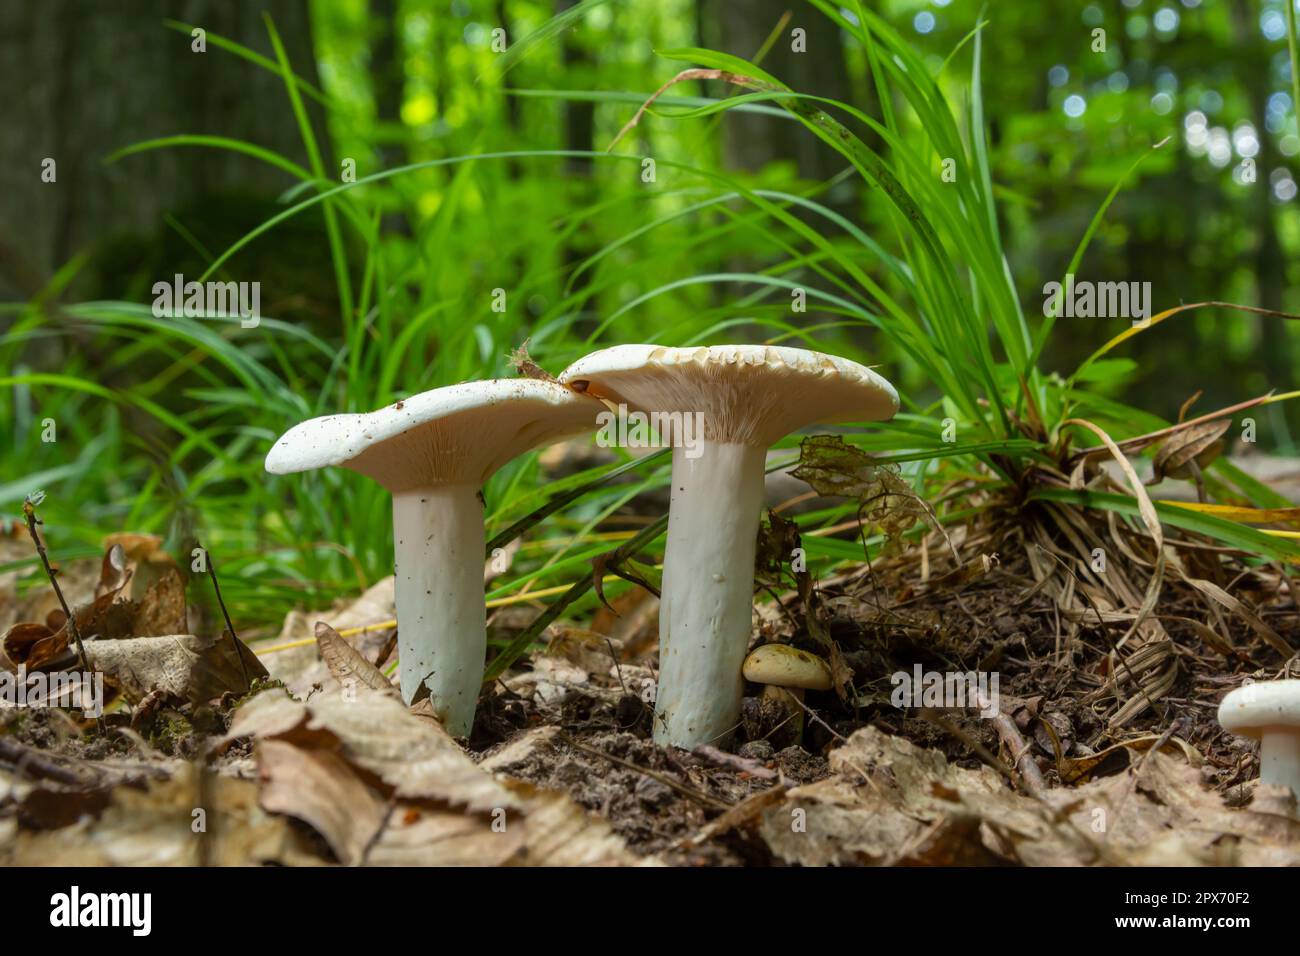 Lactarius piperatus or Peppery milkcap, widespread and popular edible mushroom, well known for its peppery, white milk. Stock Photo